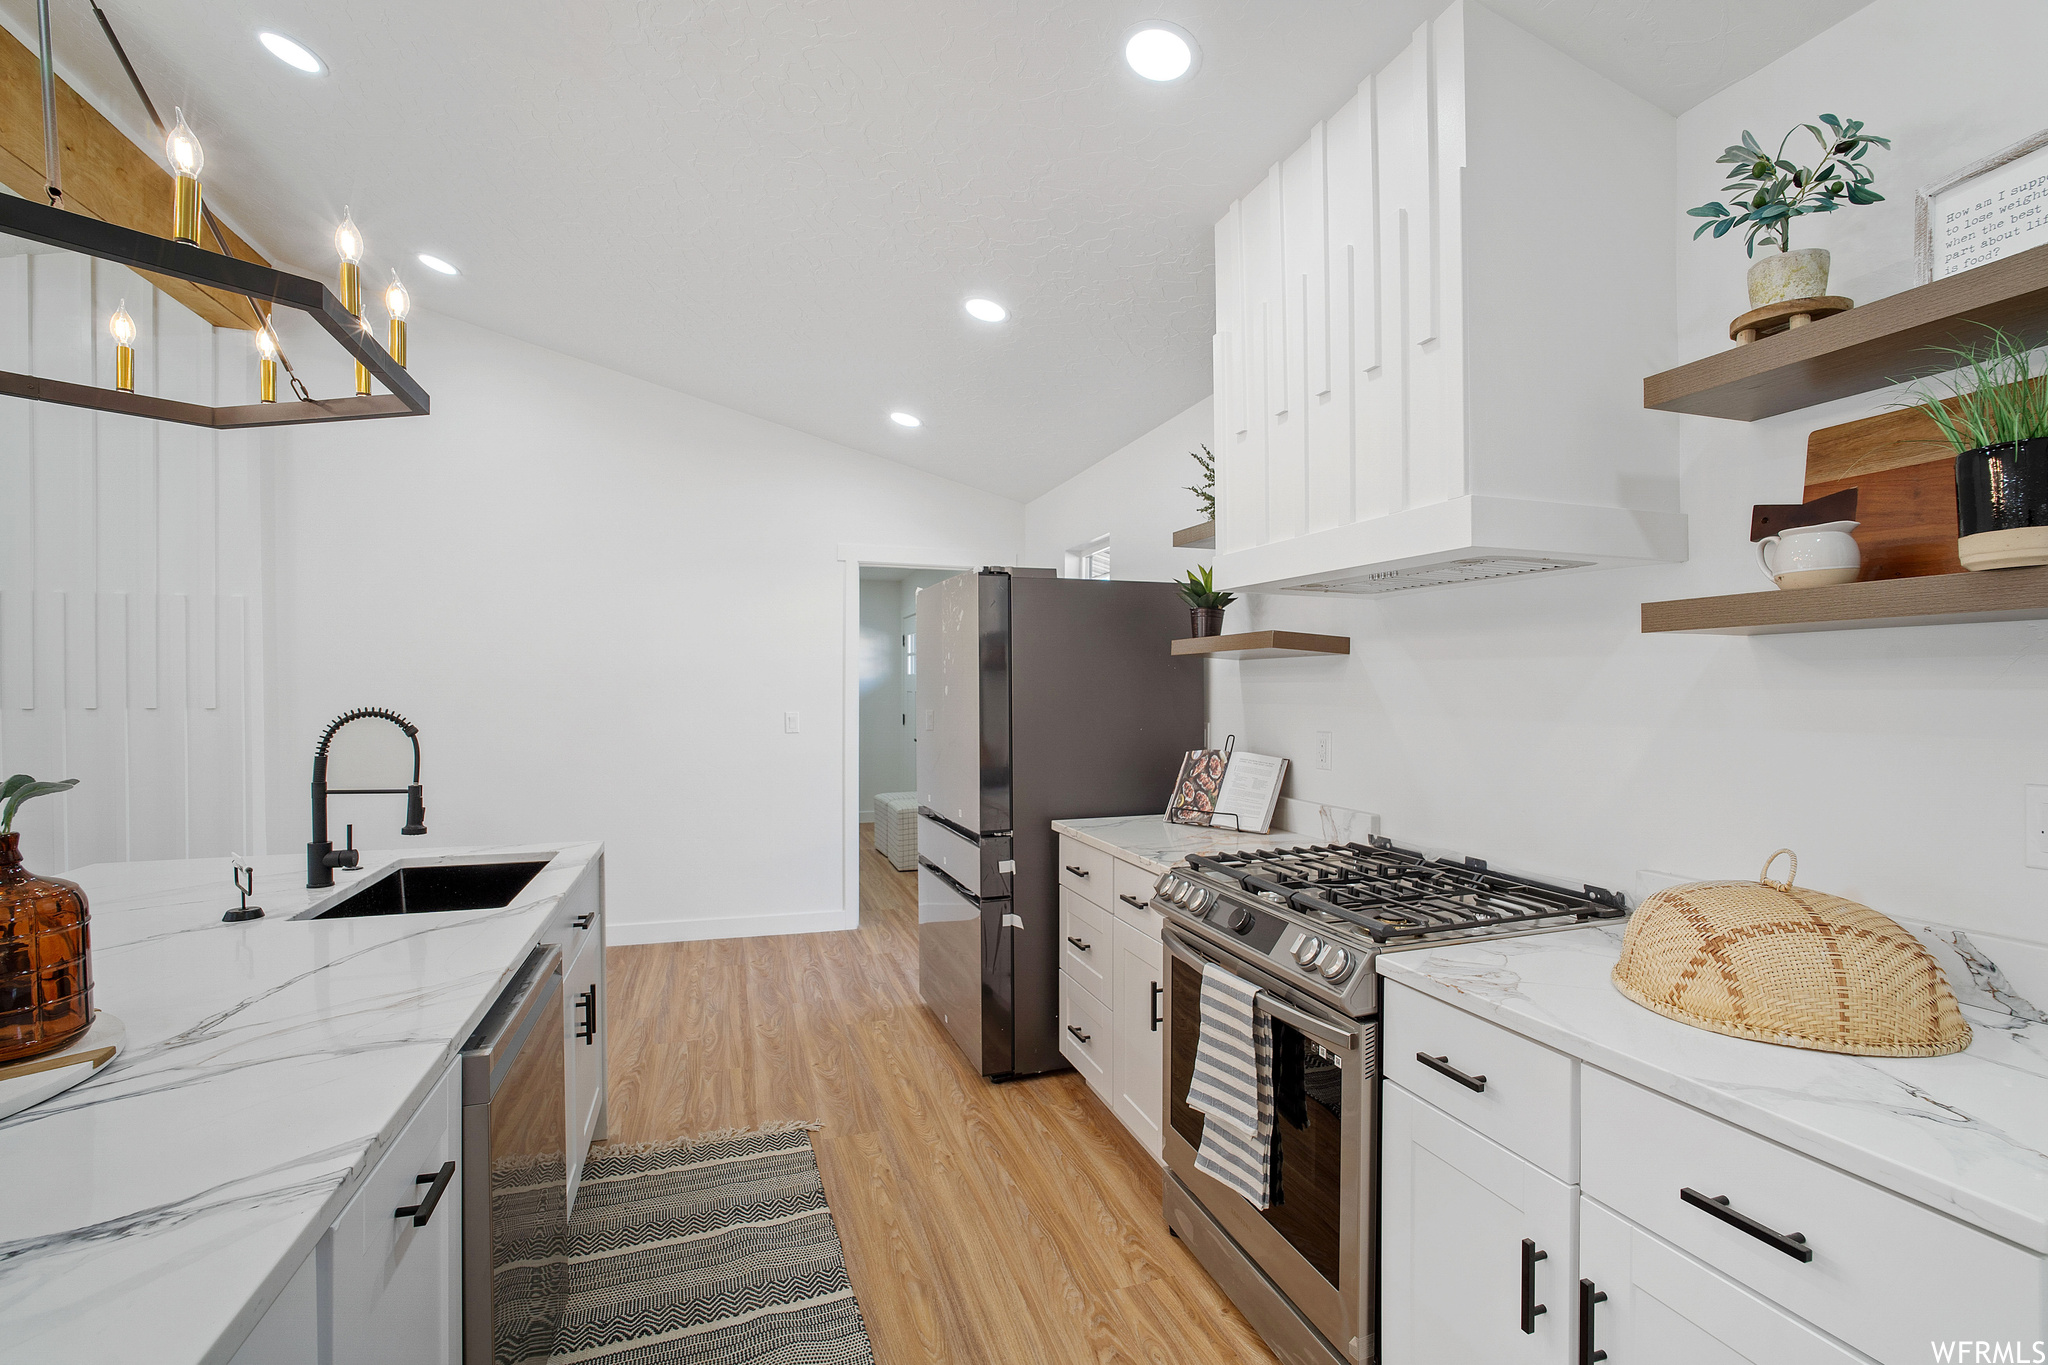 Kitchen featuring white cabinets, sink, lofted ceiling, and stainless steel appliances. Custom hood to compliment the living rooms custom accent wall.